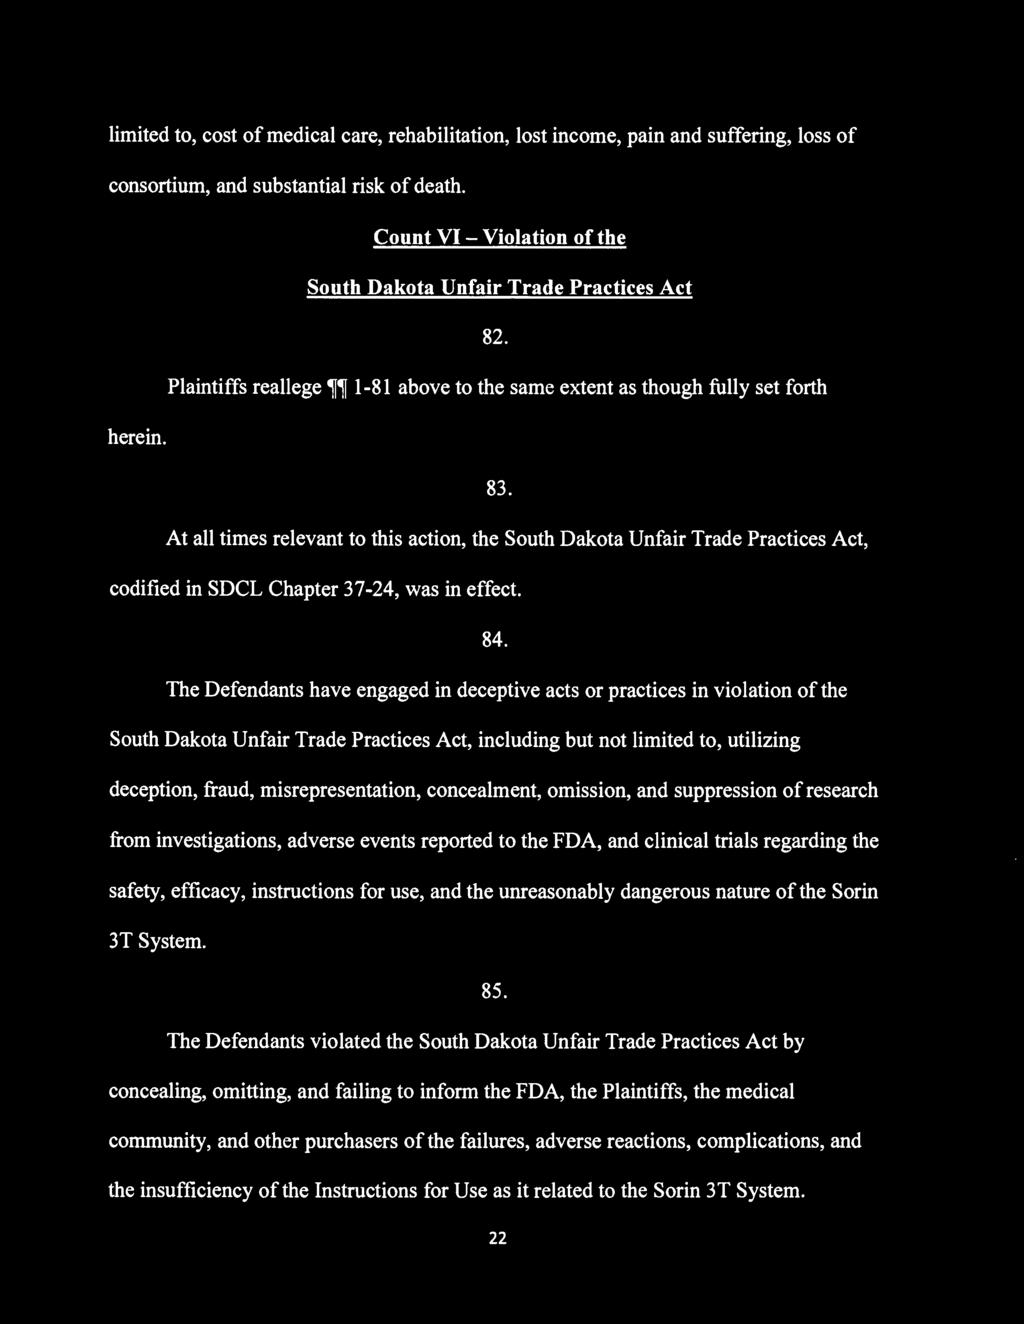 At all times relevant to this action, the South Dakota Unfair Trade Practices Act, codified in SDCL Chapter 37-24, was in effect. 84.